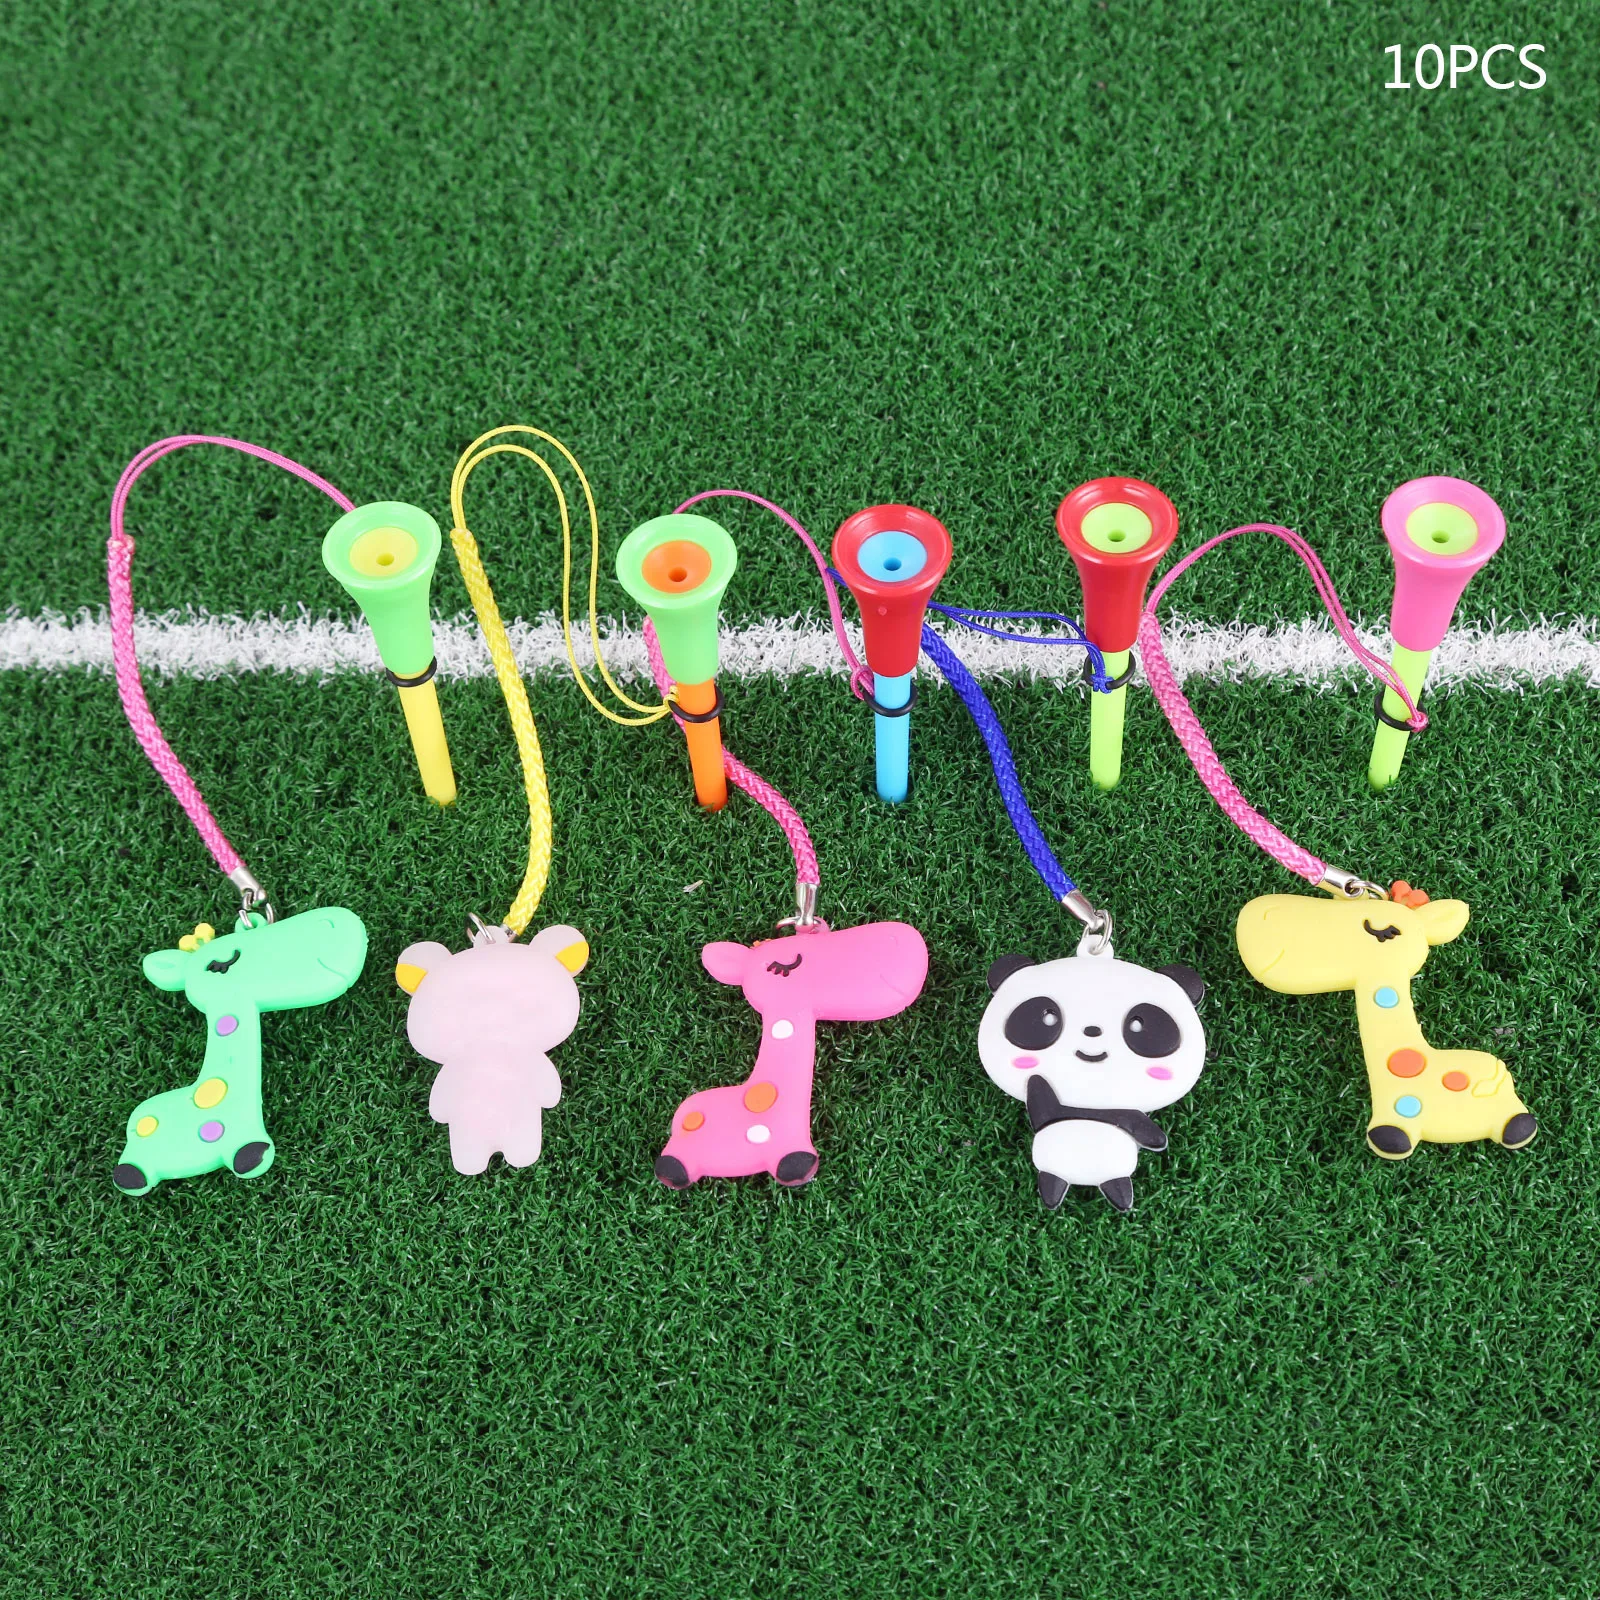 

5Pcs Golf Rubber Tees Golf Ball Holder with Handmade Different Cartoon Pattern Braided Rope Prevent Loss Golf Accessories Gifts